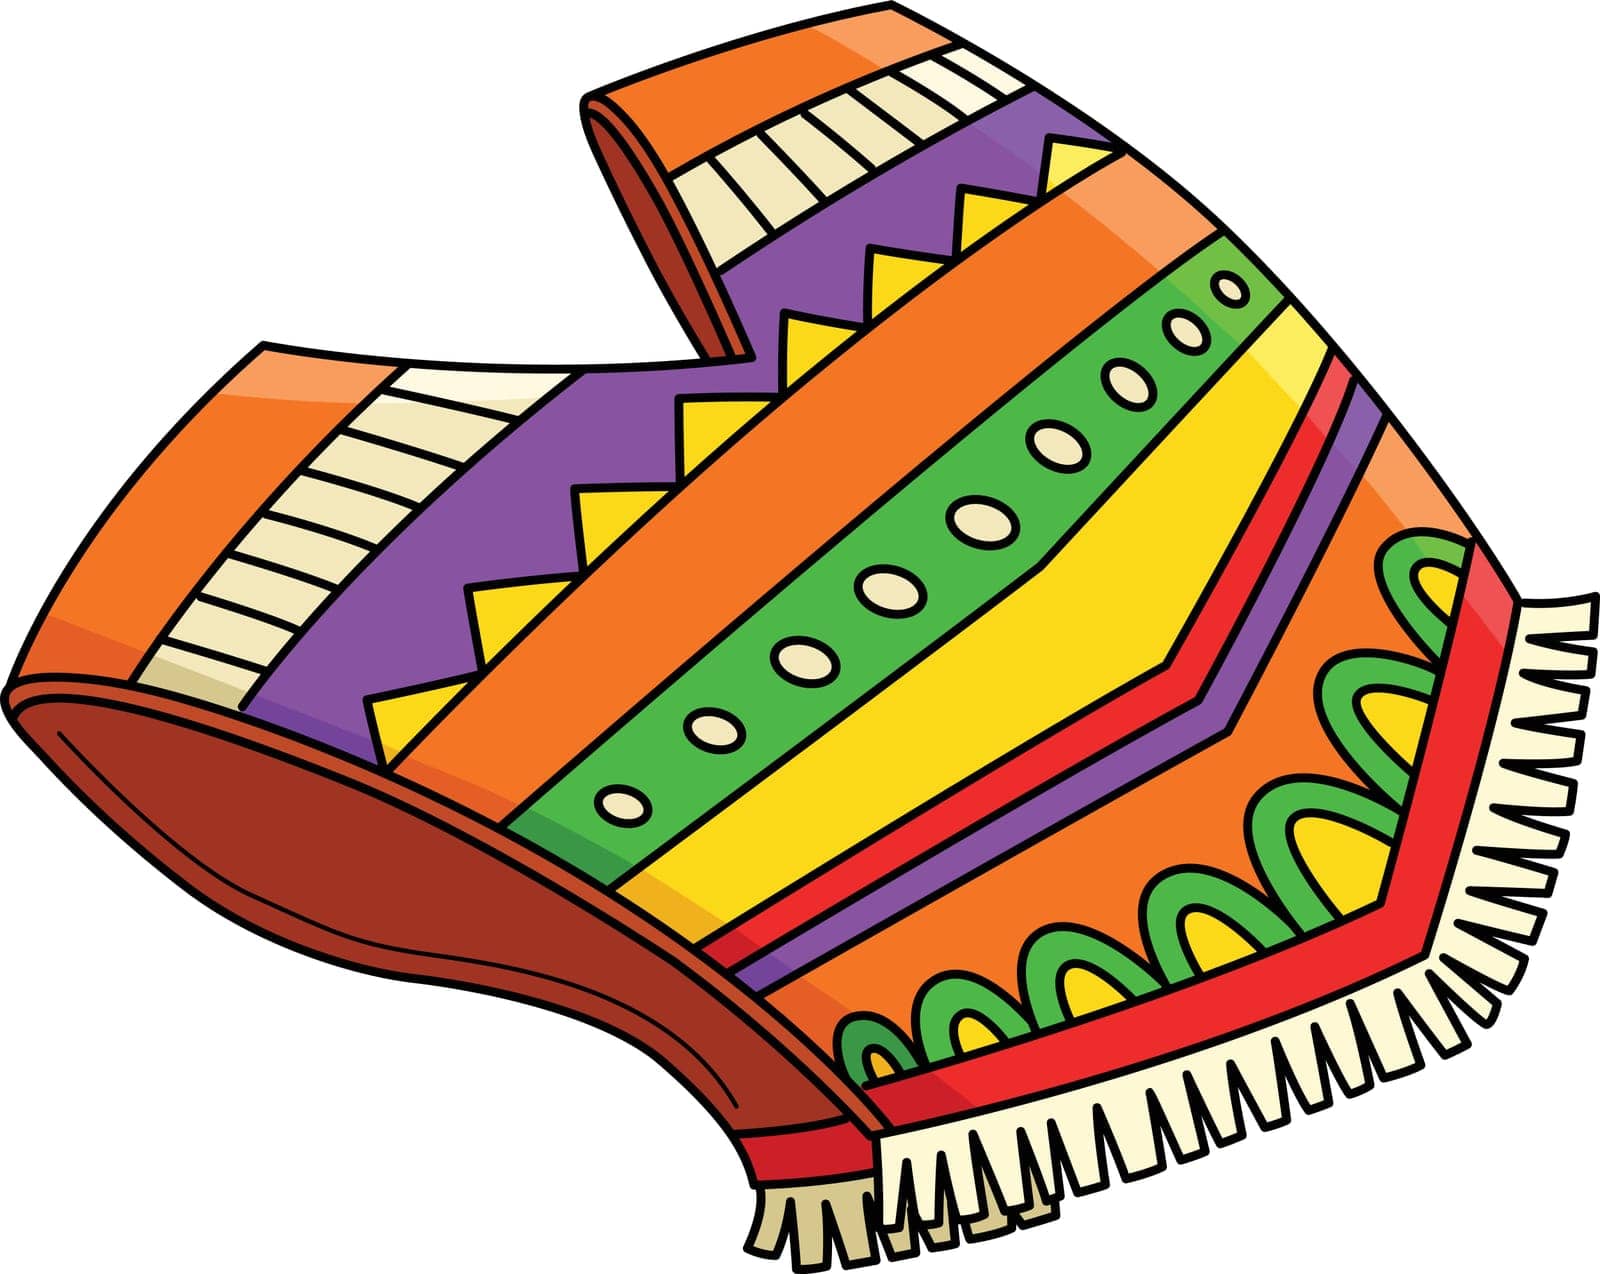 Poncho Cartoon Colored Clipart Illustration by abbydesign